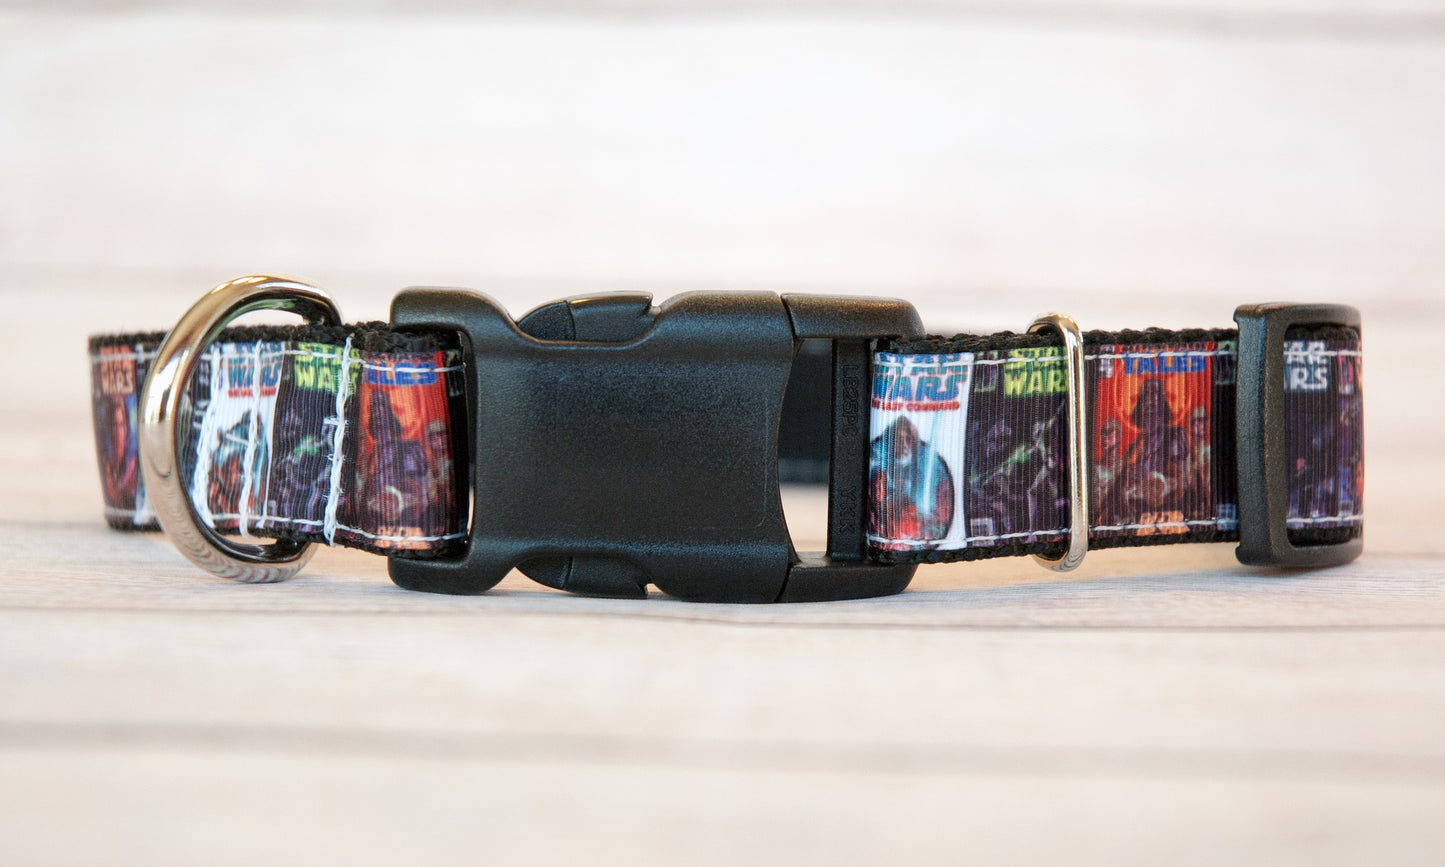 Star Wars Book covers dog collar. 1 inch wide